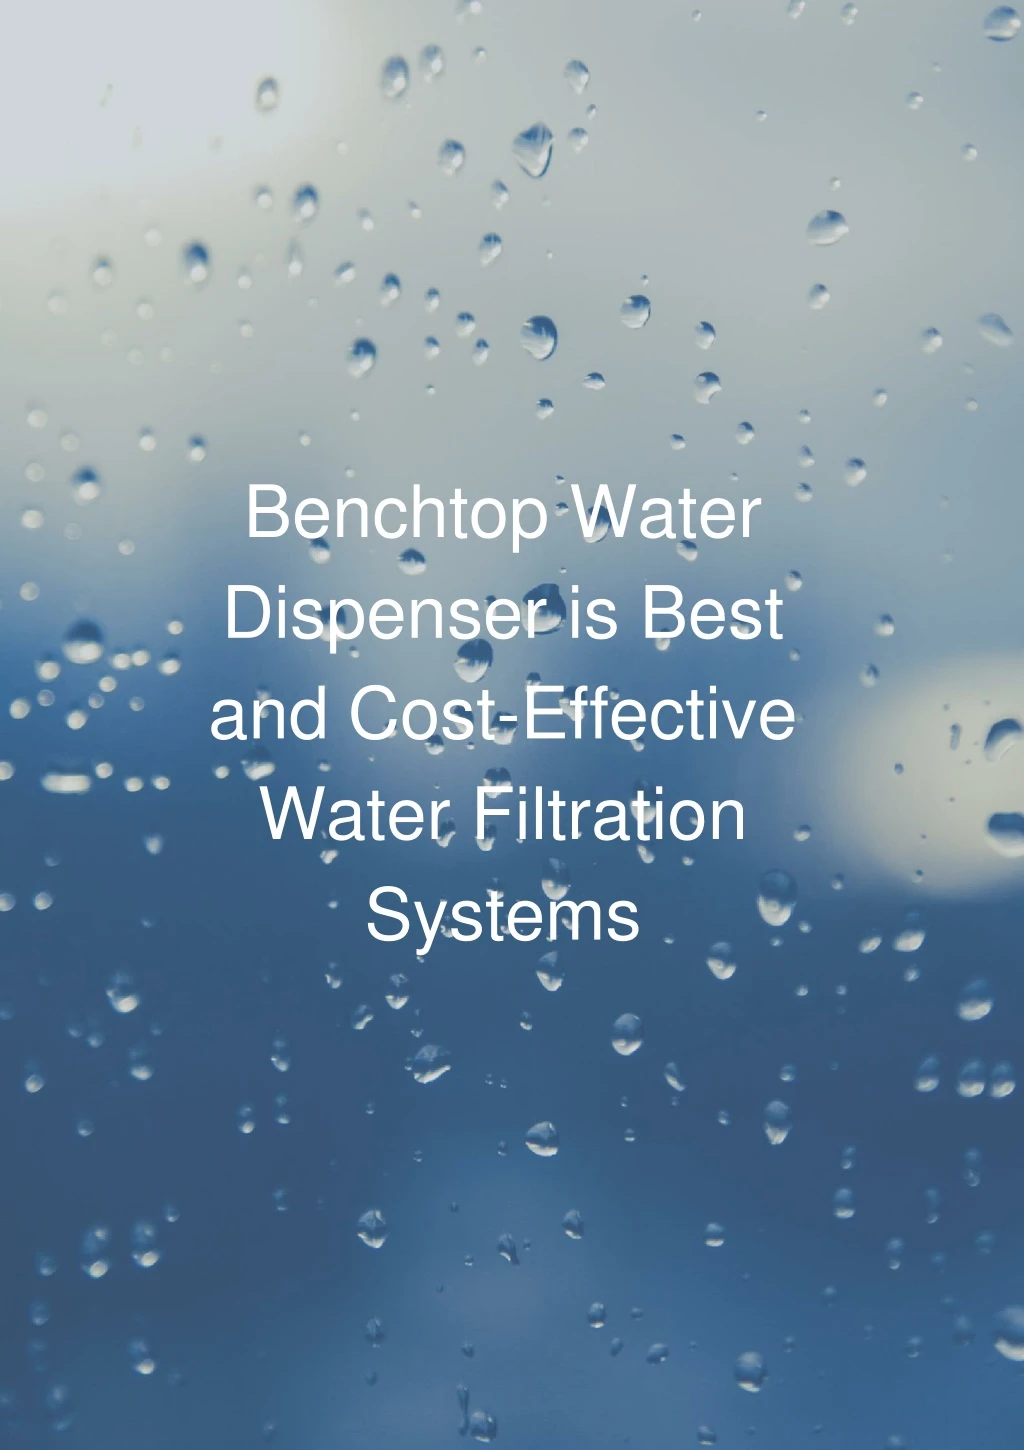 benchtop water dispenser is best and cost effective water filtration systems